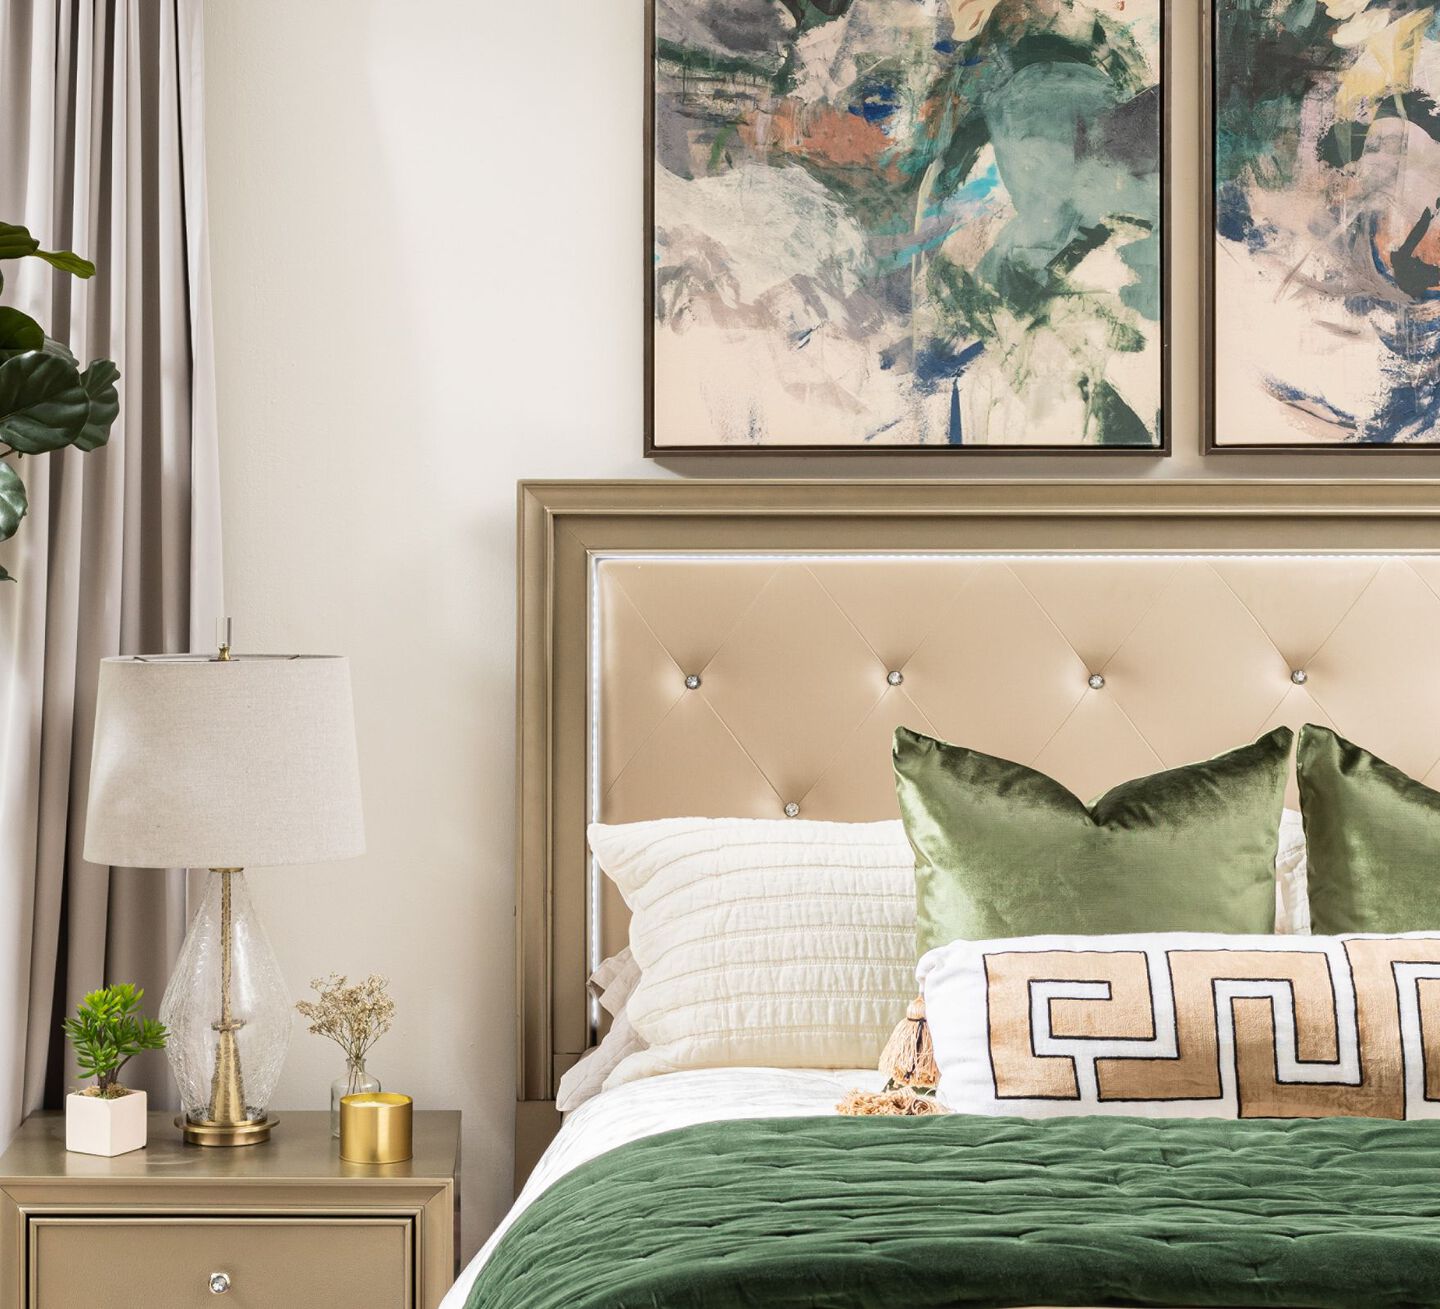 Bedroom with beige bed with green and white bedding sitting under two abstract paintings hanging on the wall